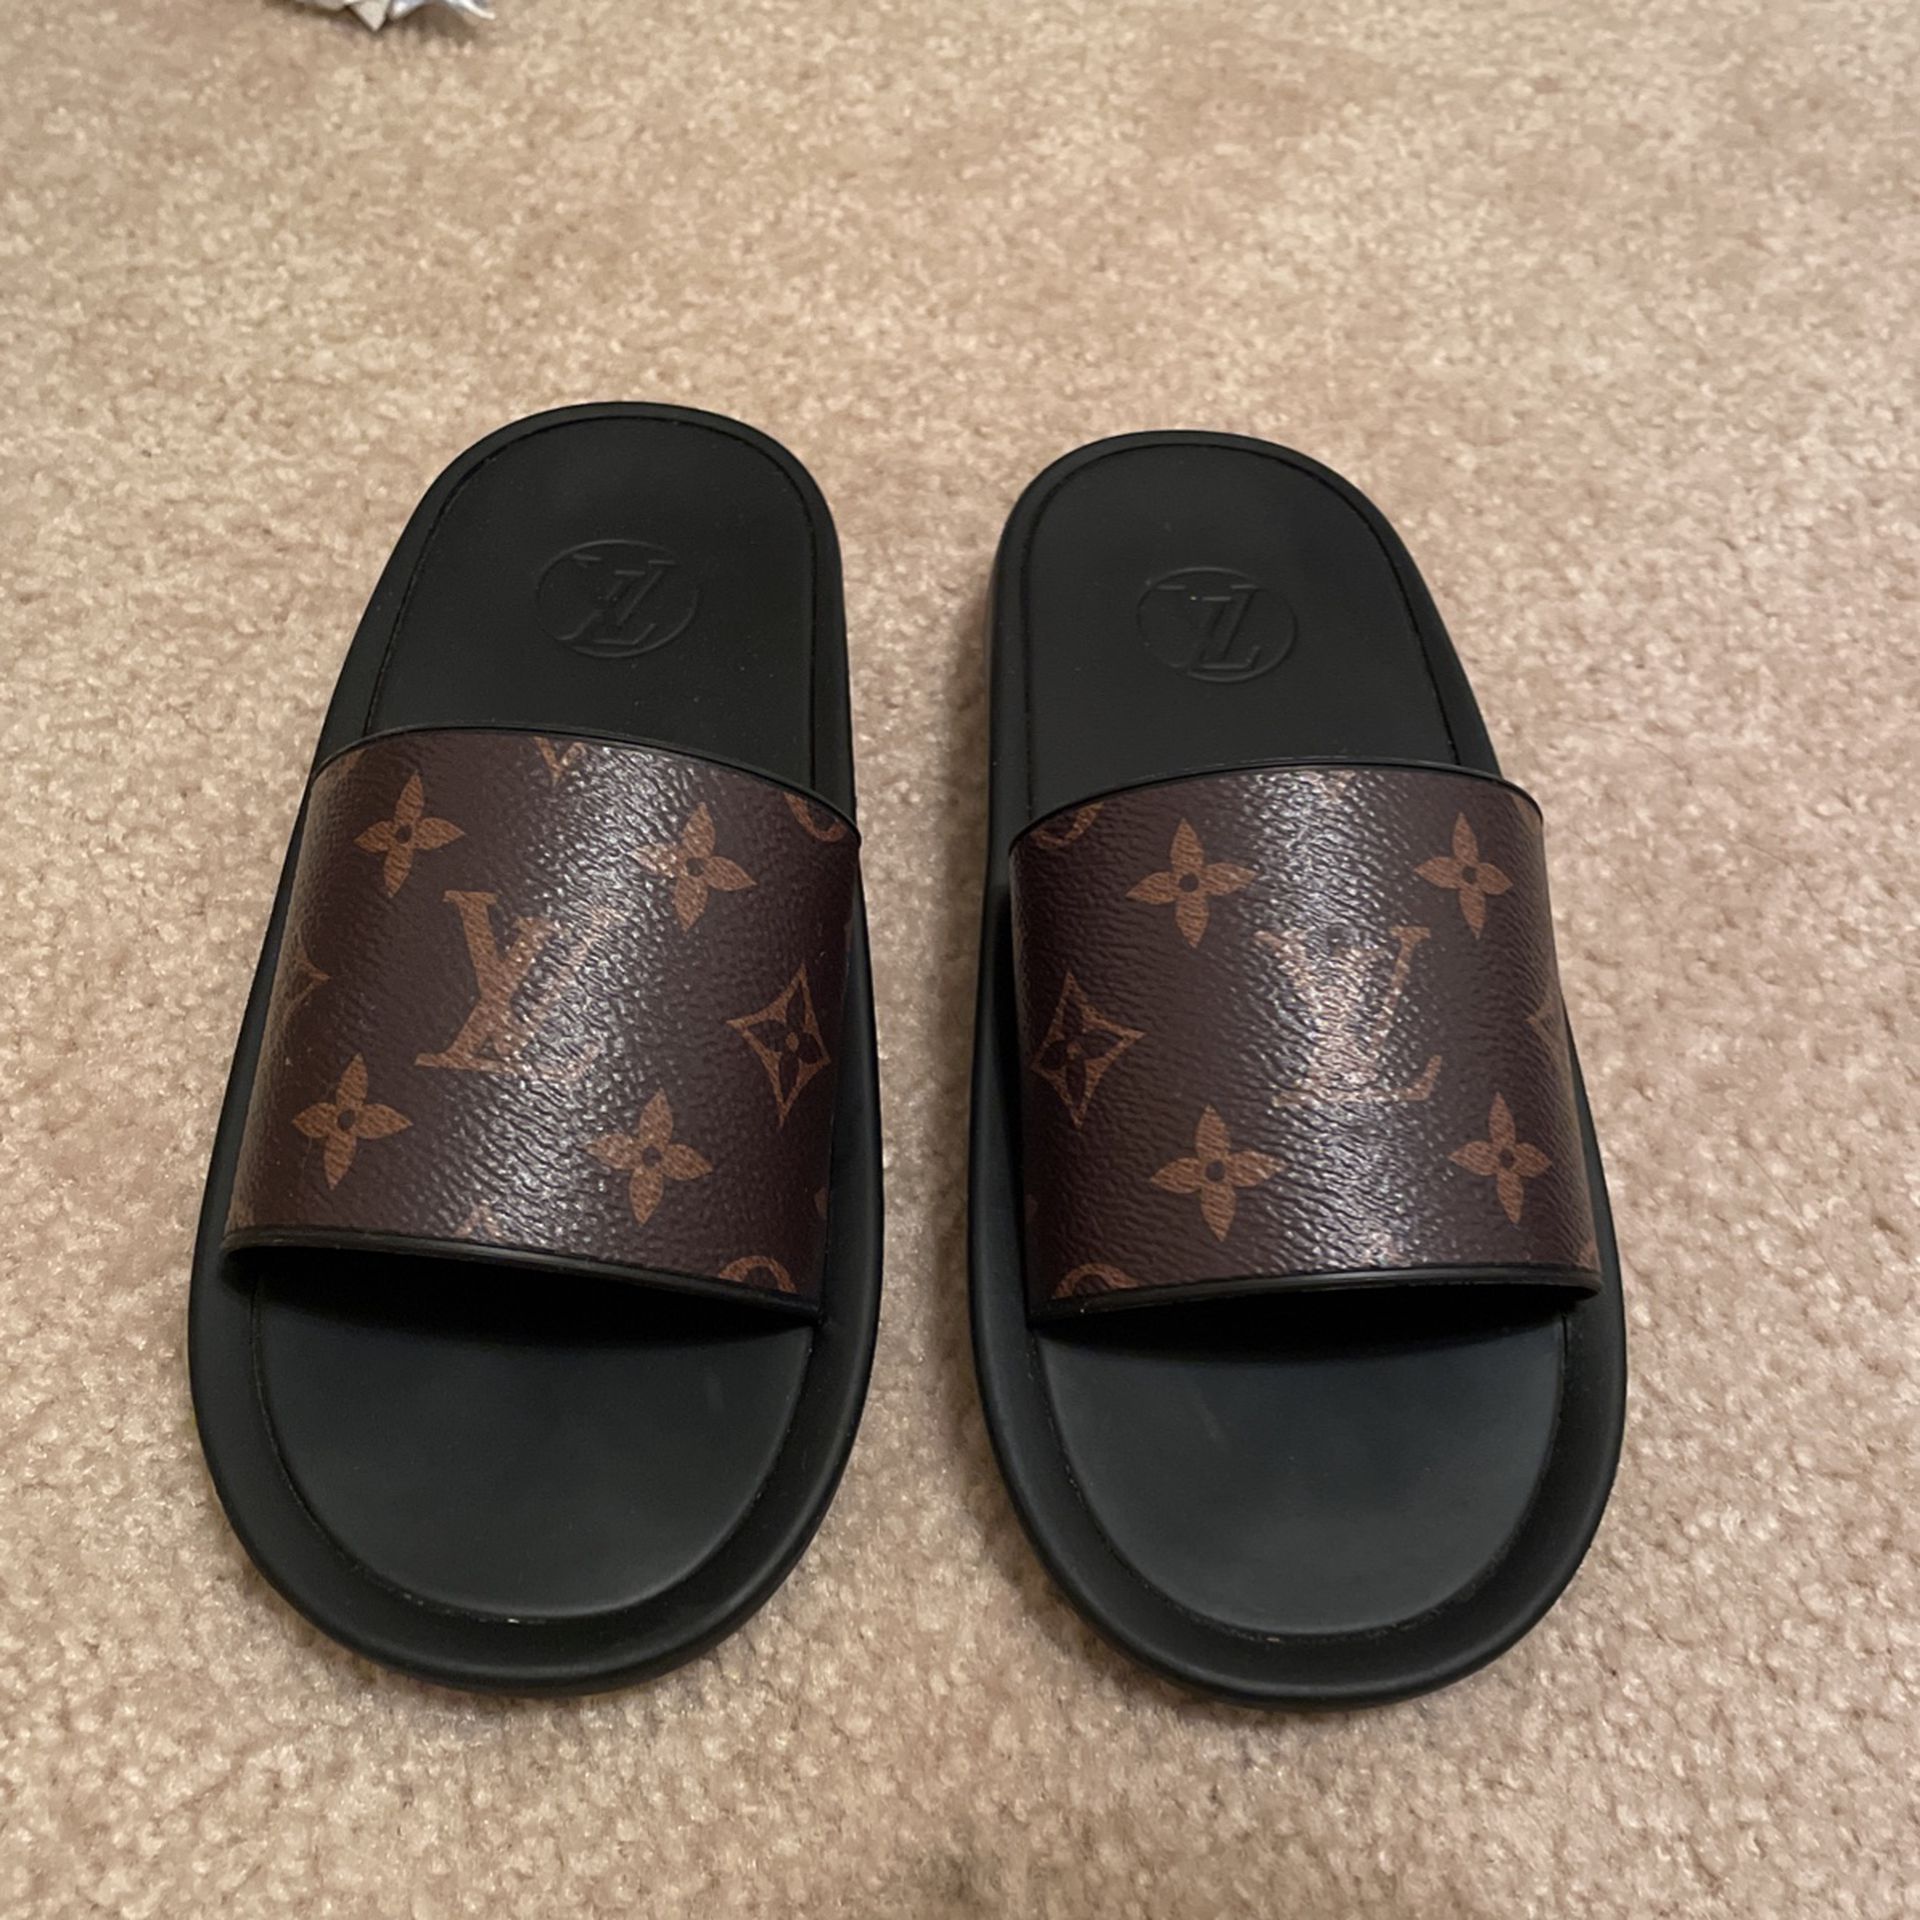 Limited Edition Louis Vuitton Slides for Sale in Frisco, TX - OfferUp